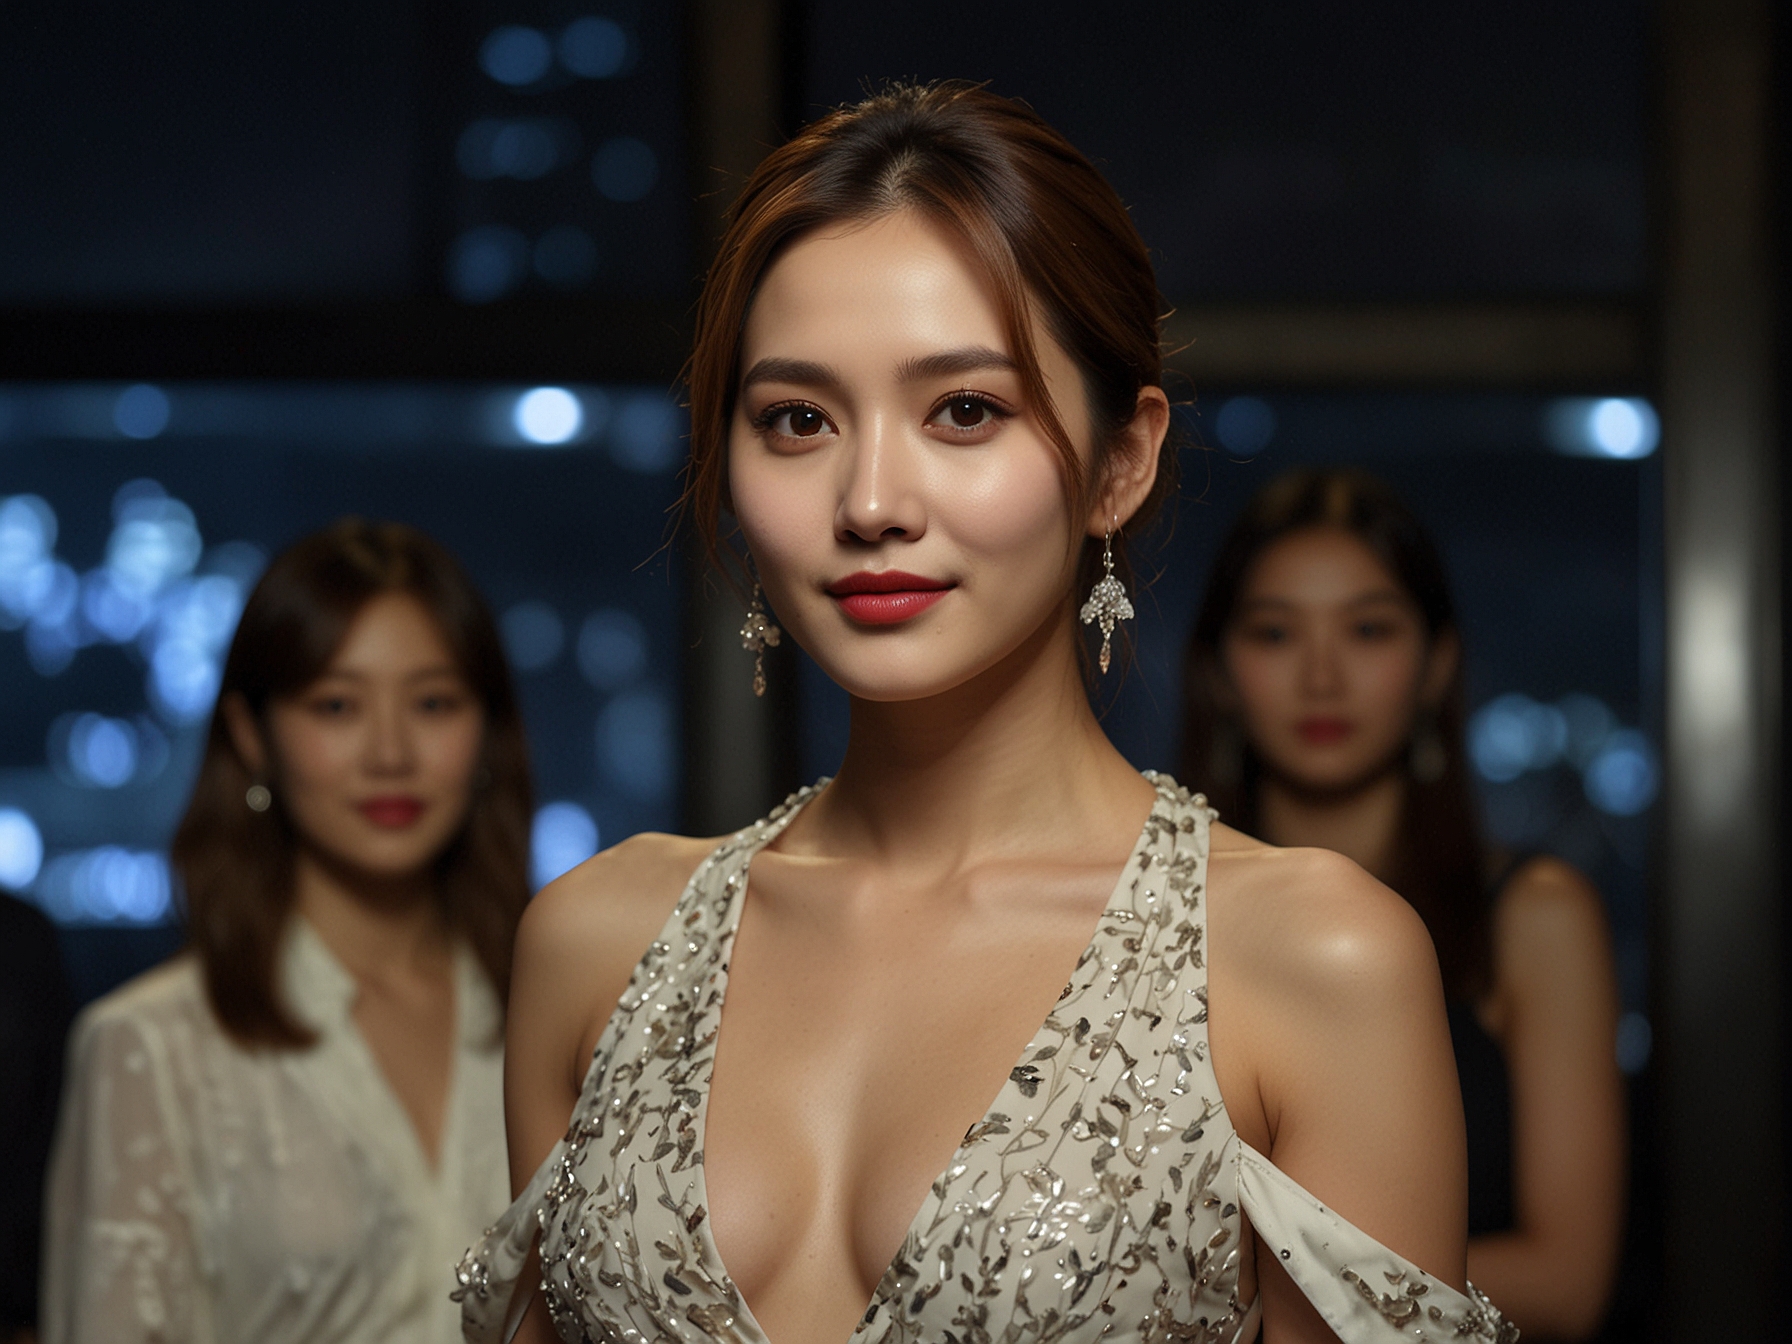 The star-studded cast of 'Snow White’s Revenge' celebrates at the wrap party in Seoul. Han Chae Young stands out with her elegant appearance, symbolizing the strong bonds formed during filming.